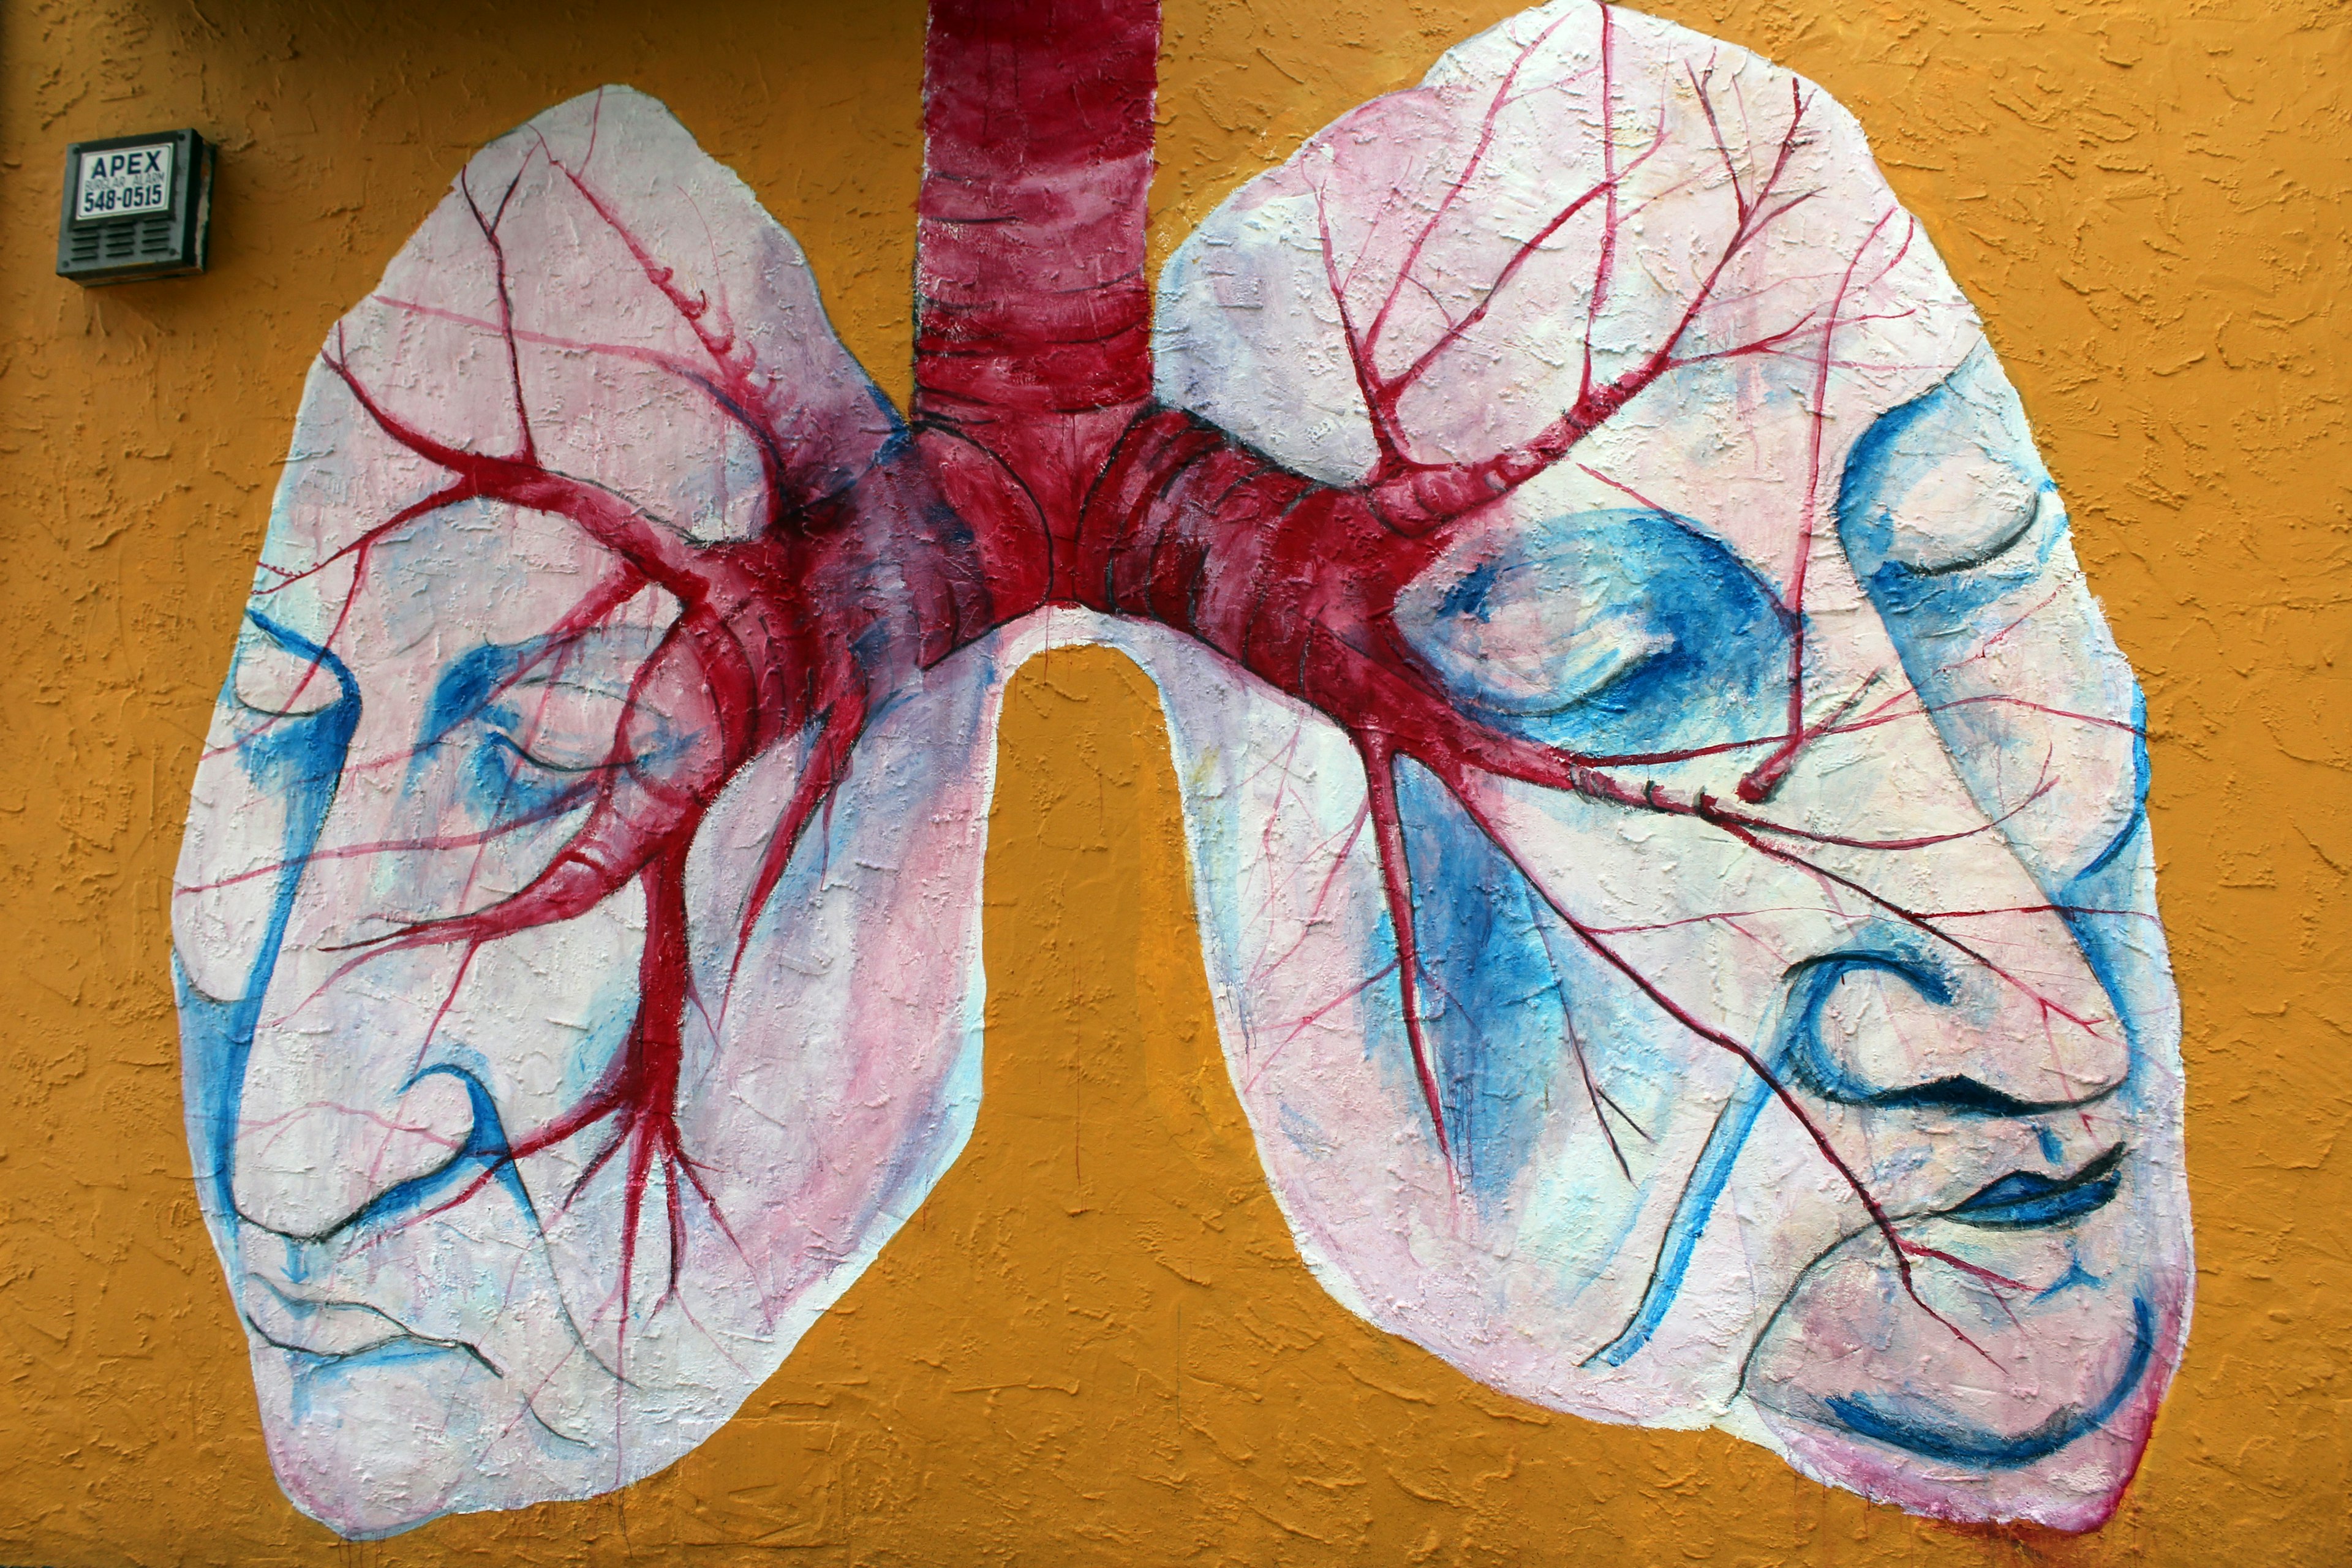 artistic depiction of a pair of lungs painted on a yellow wall